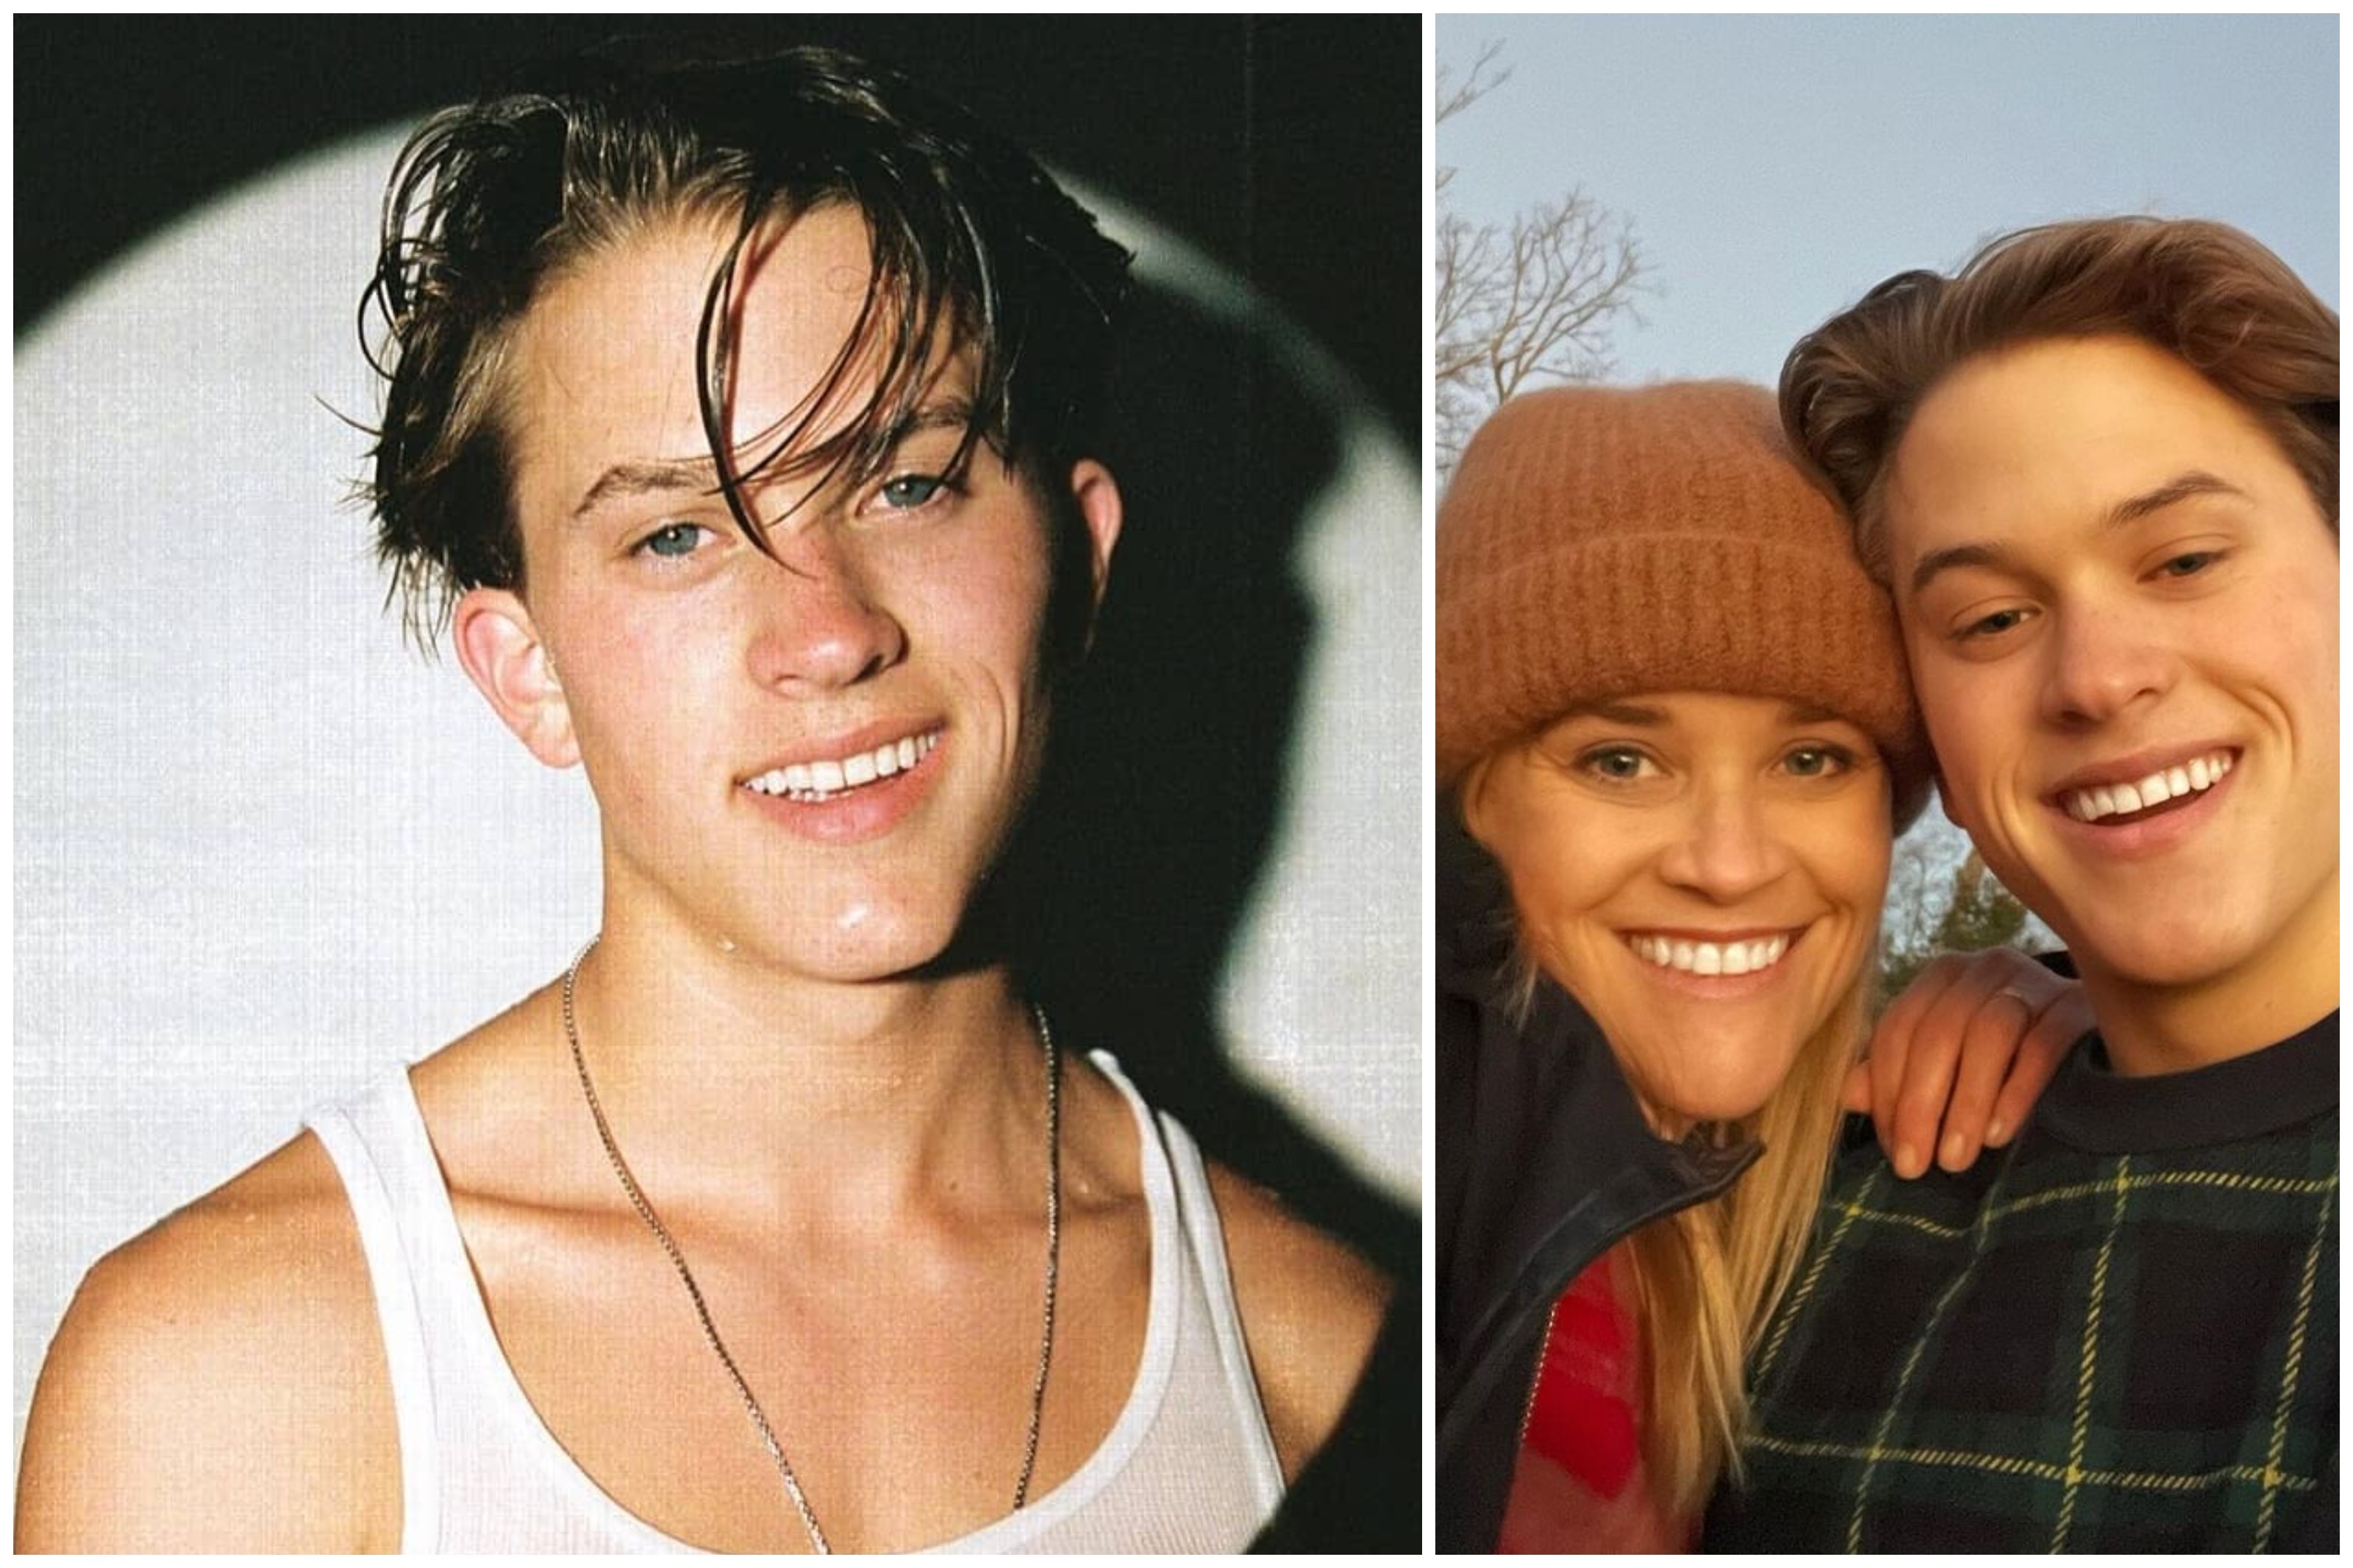 Deacon Phillippe is Reese Witherspoon’s 18-year-old son. Photos: @reese_witherspoon_family, @reesewitherspoon/Instagram